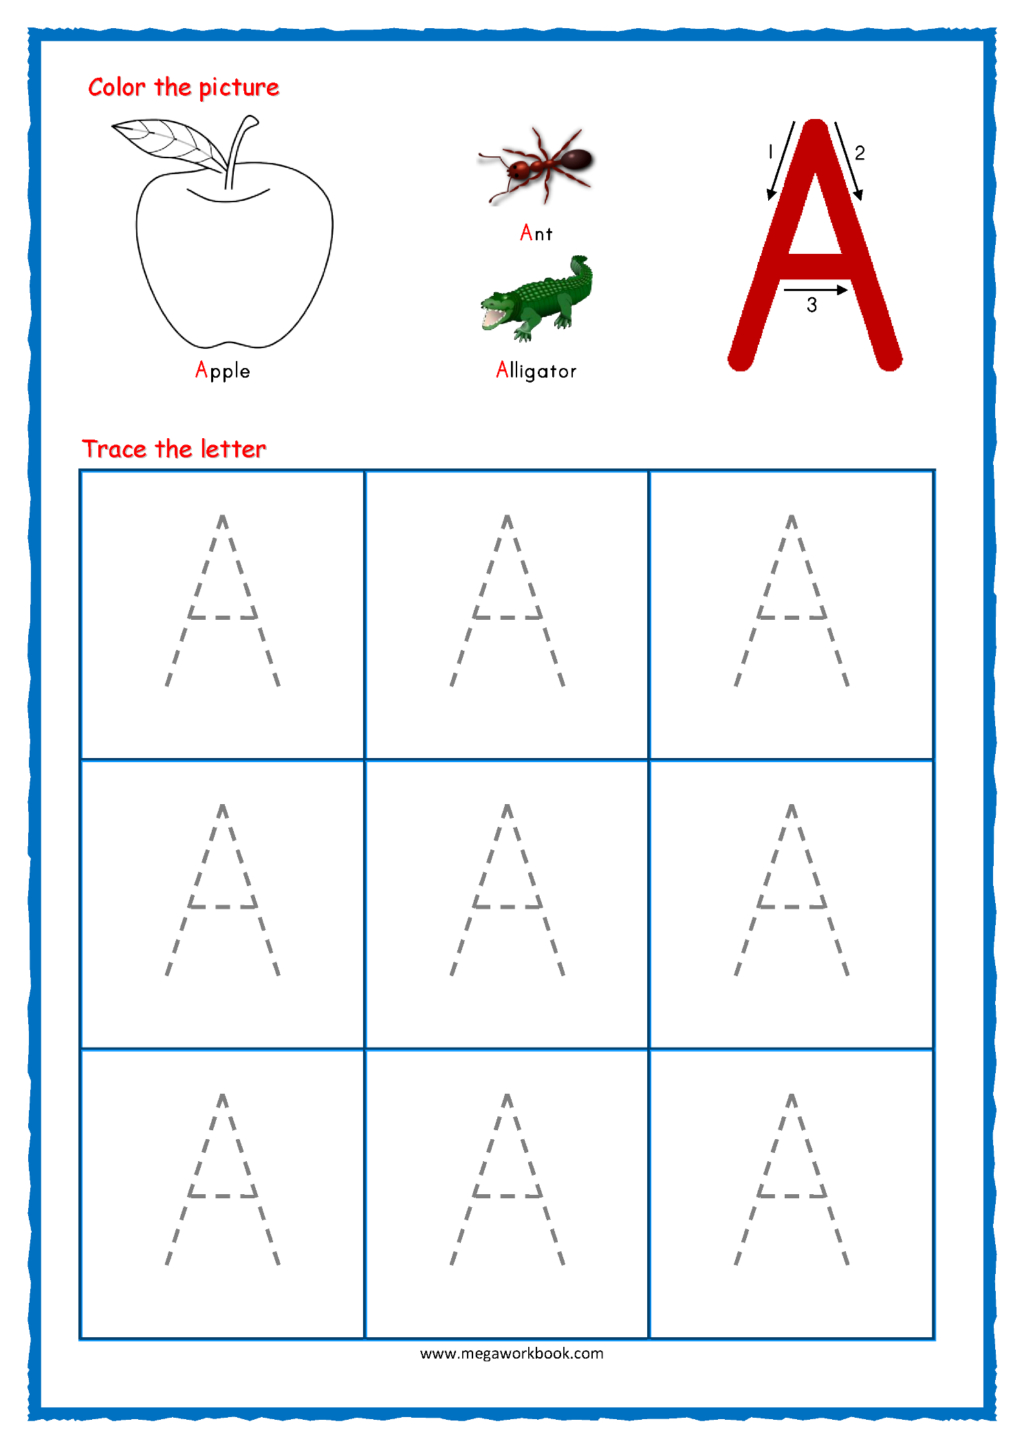 Worksheet ~ Capital Letter Tracing With Crayons 01 Alphabet intended for Letter Tracing I